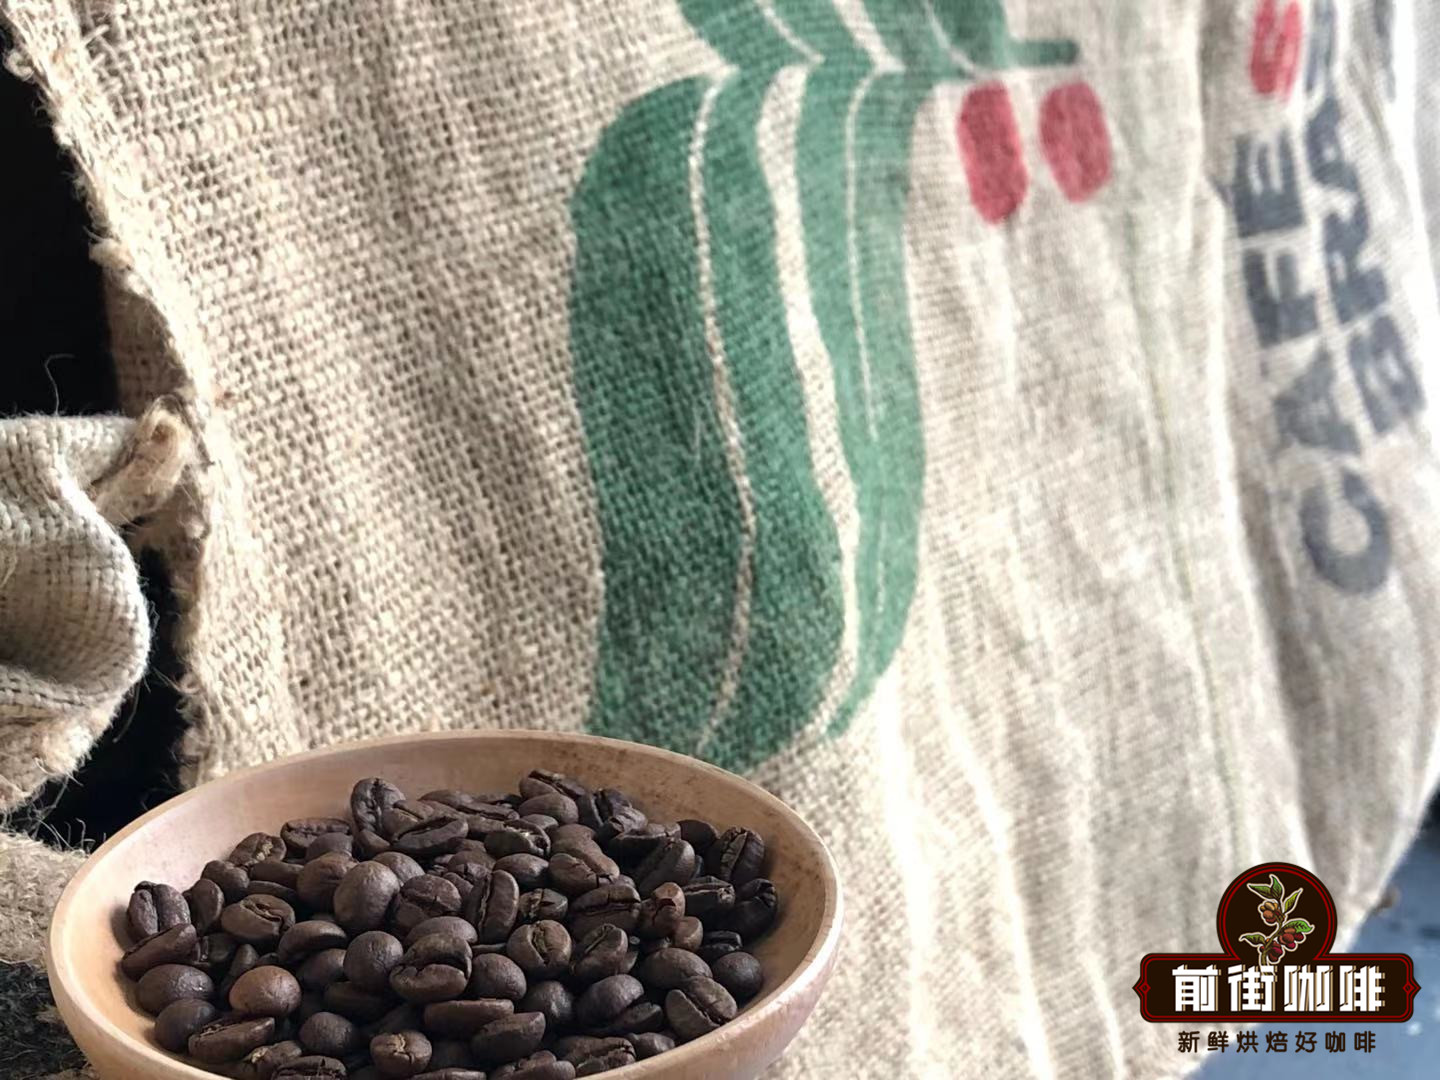 The improvement of coffee quality in Brazil has become the second largest source of coffee inventory on the ICE Exchange in the United States.